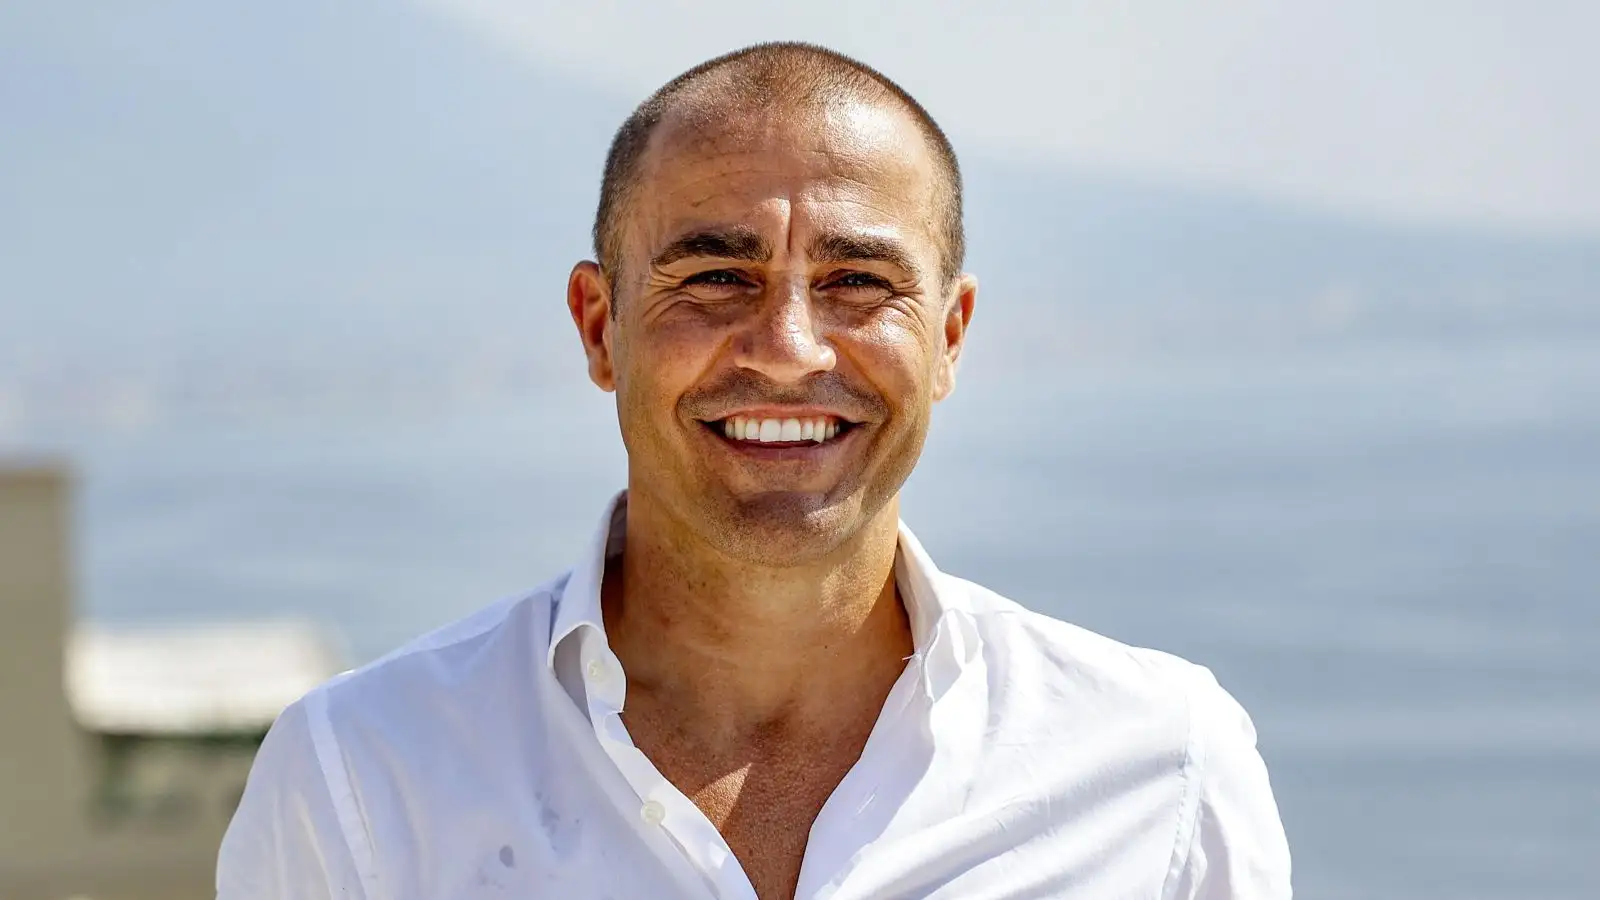 Cannavaro claims Man Utd player could be ‘of no use’ to Serie A giants Juventus